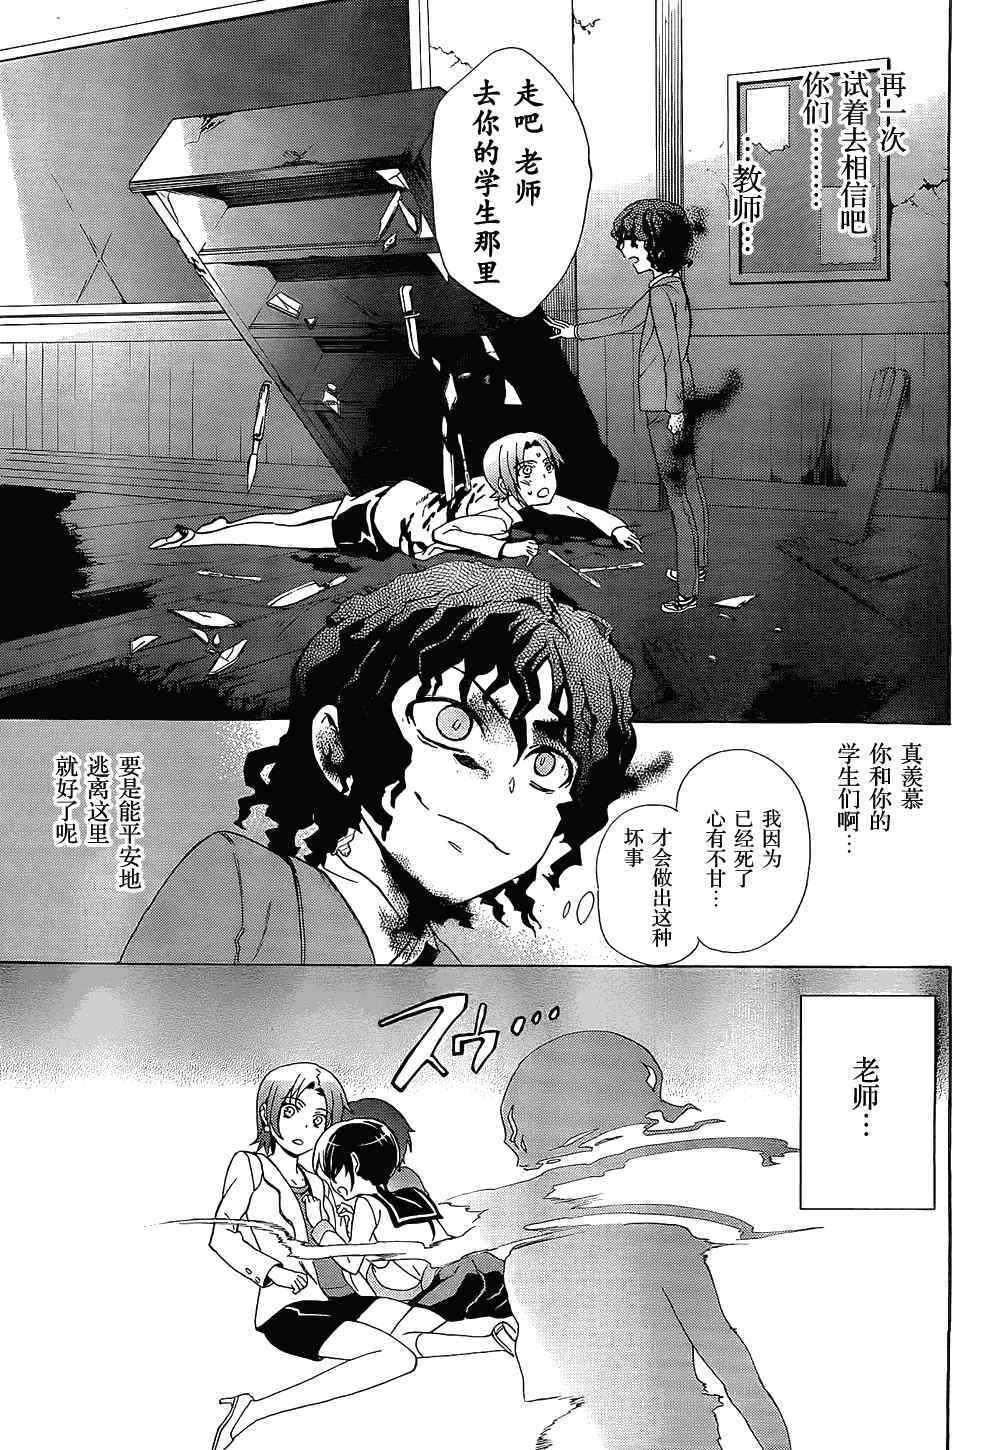 BLOOD_COVERED - 第33話 - 3